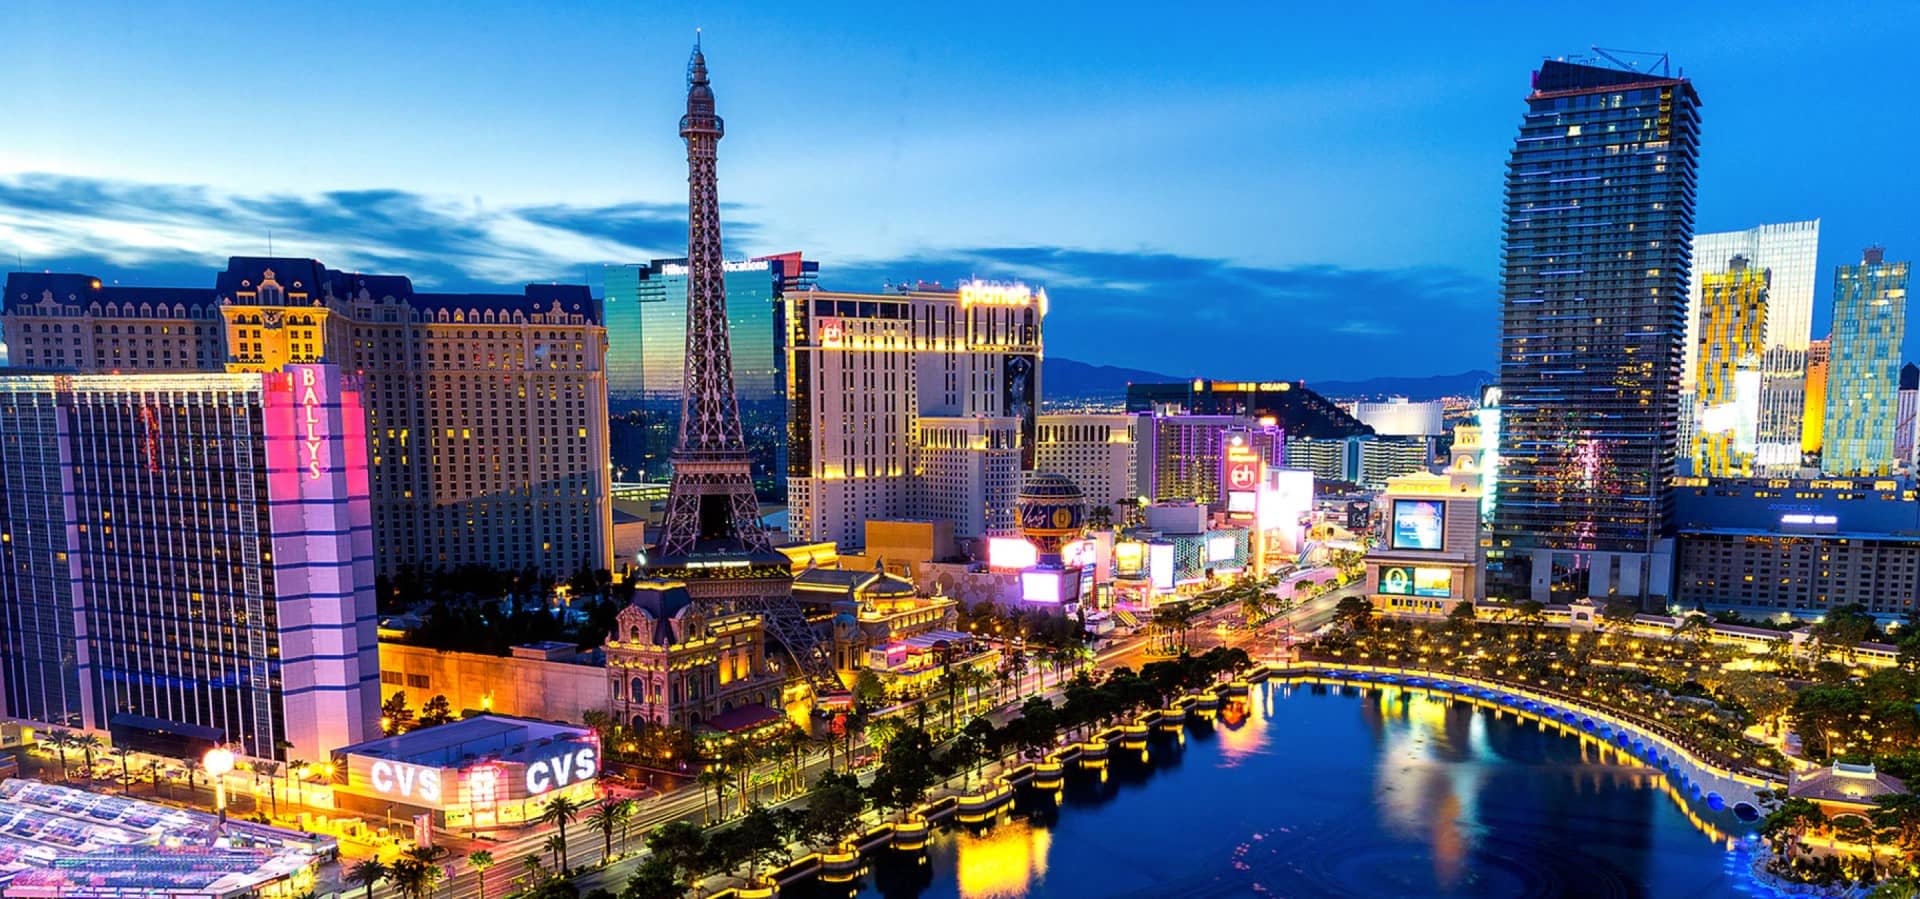 High Room Rates at Las Vegas During March Madness